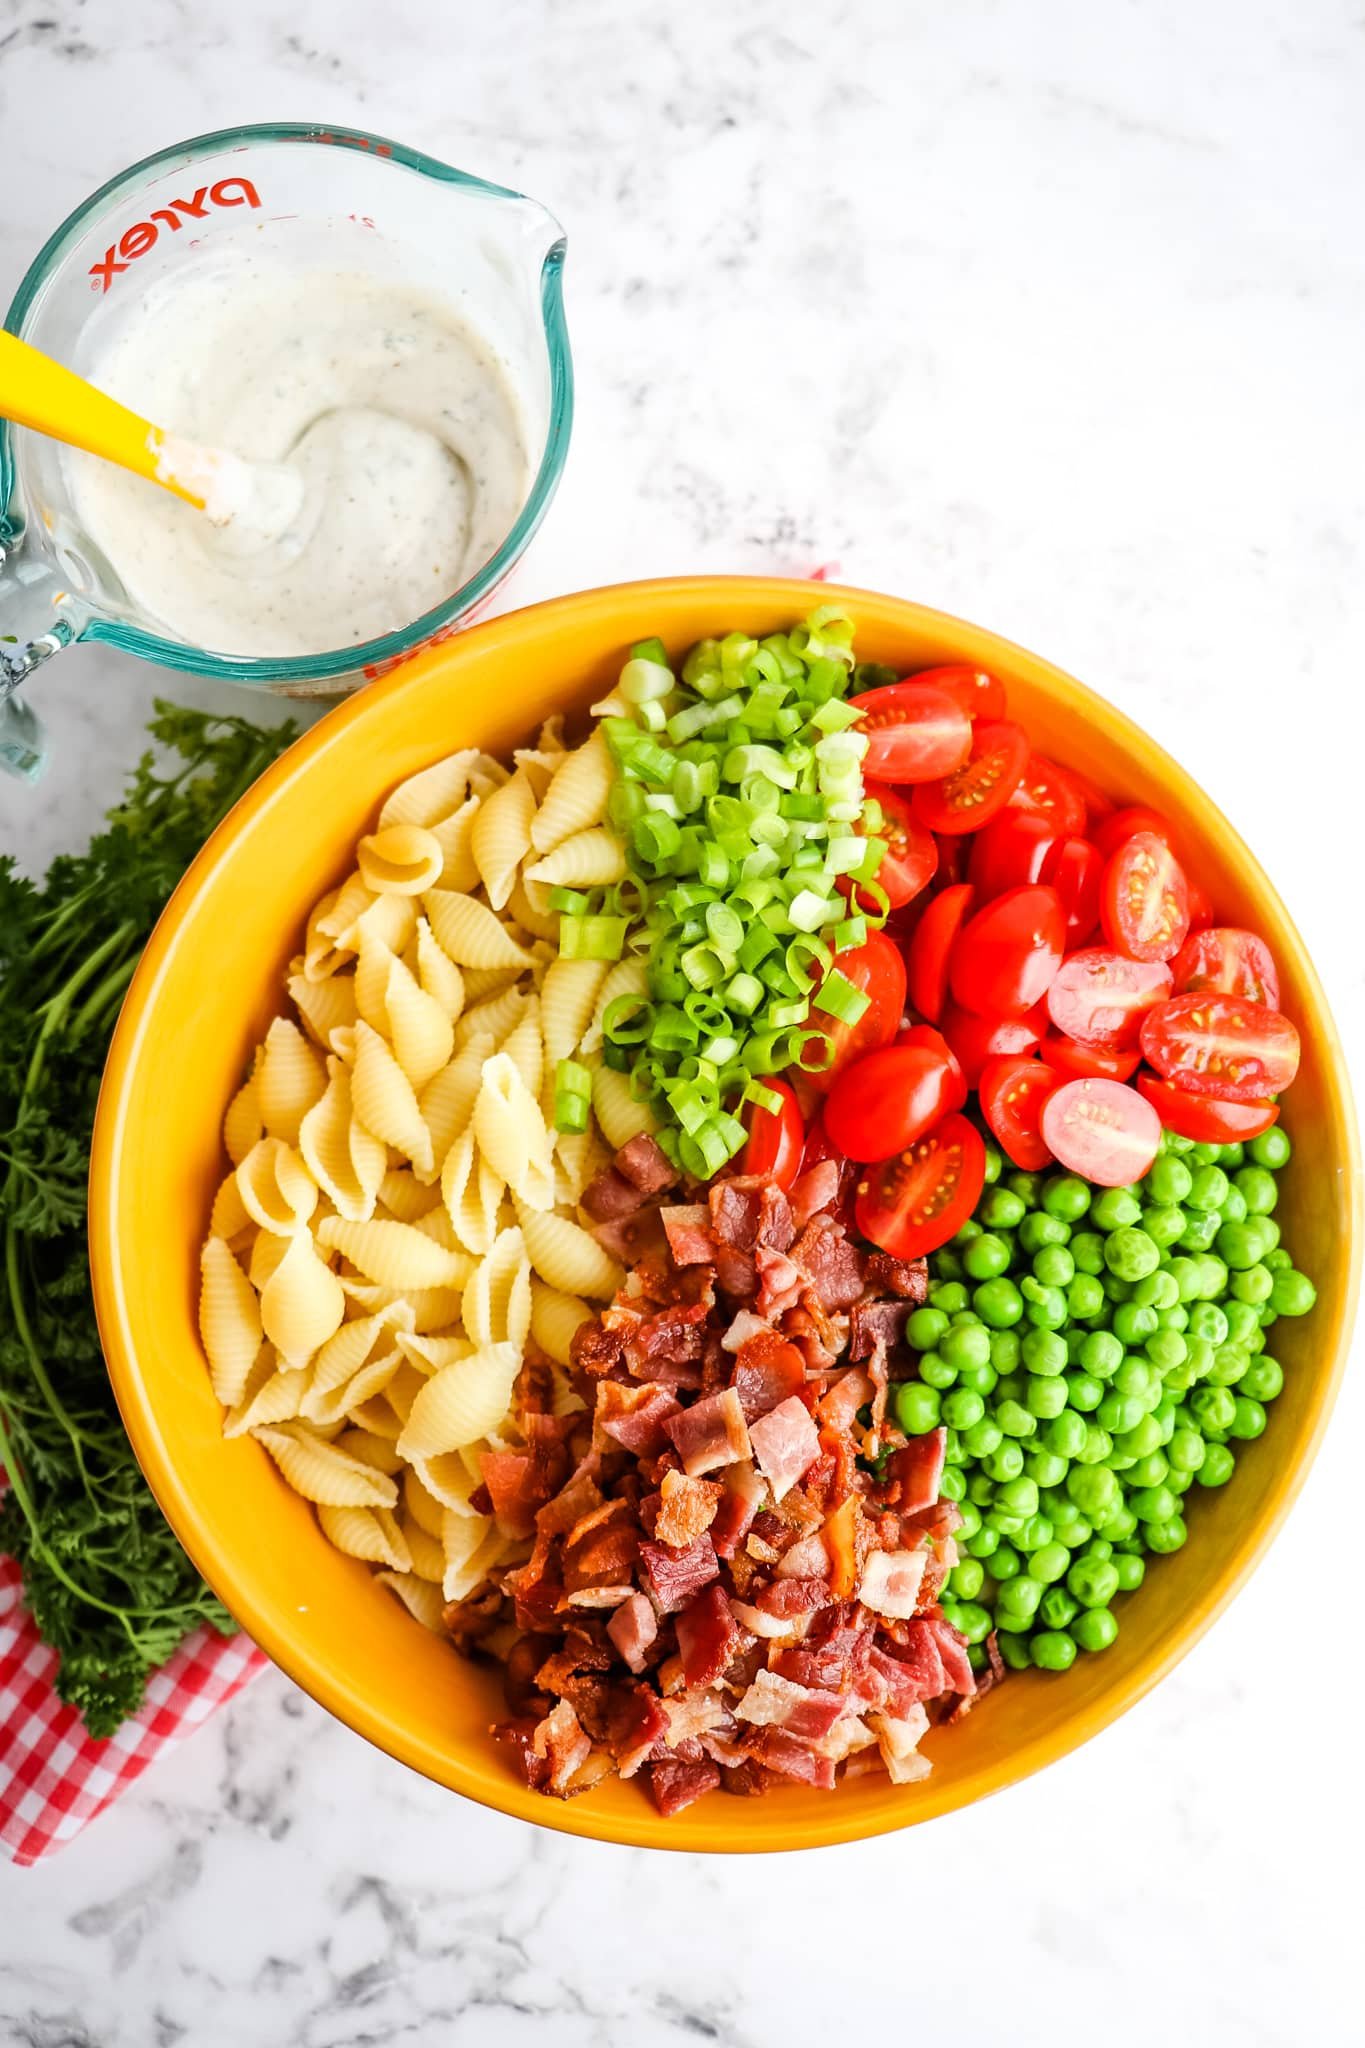 Ingredients of pasta salad in bowl, with dressing on the side.